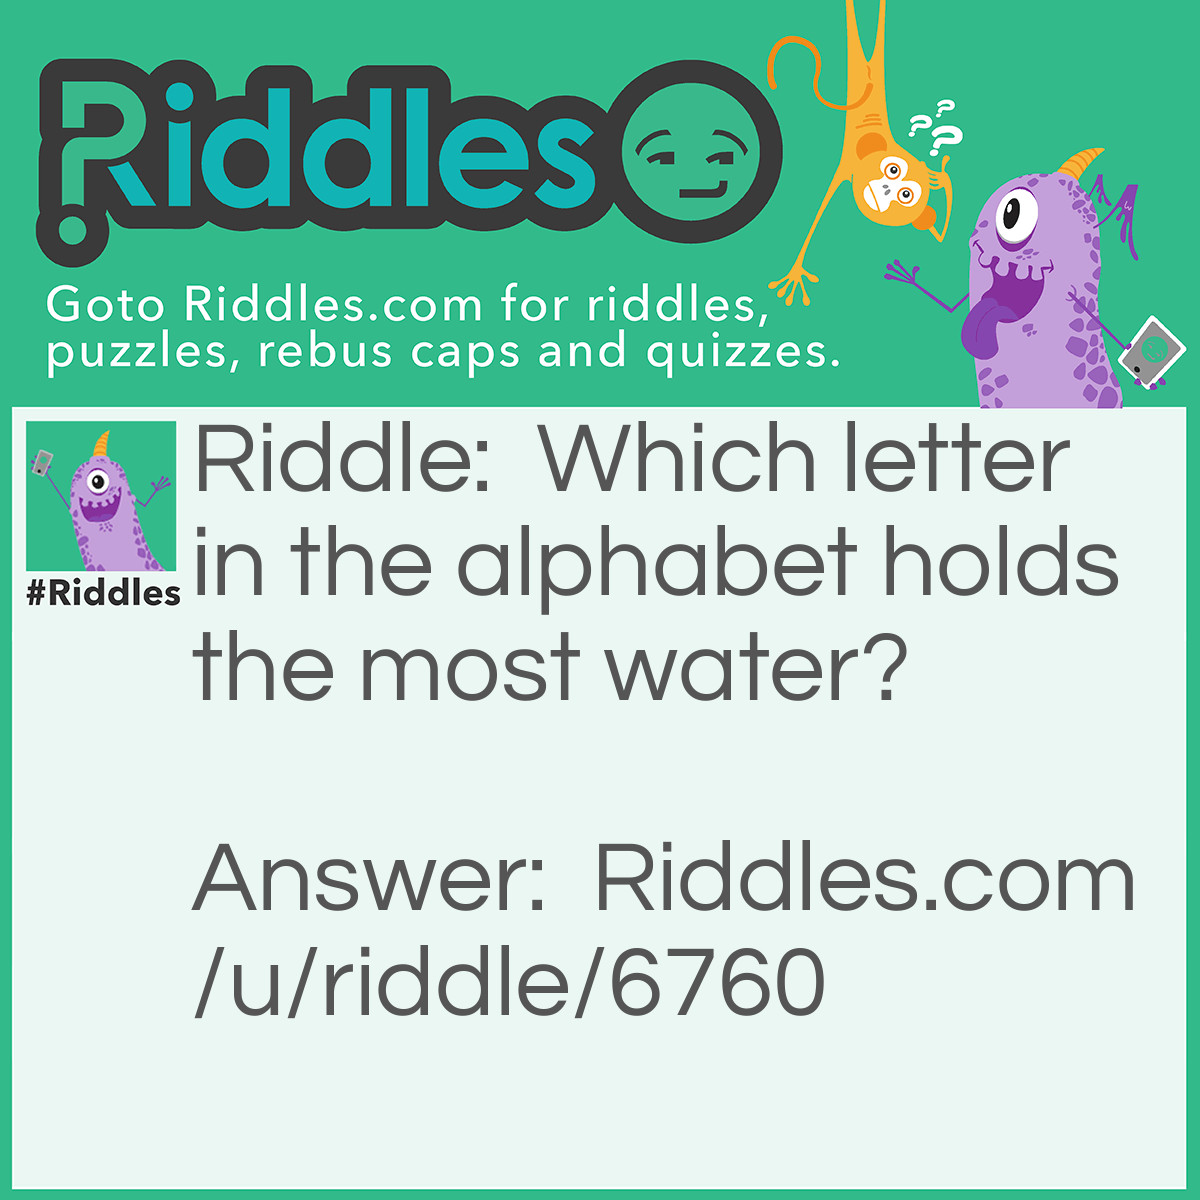 Riddle: Which letter in the alphabet holds the most water? Answer: The letter C.